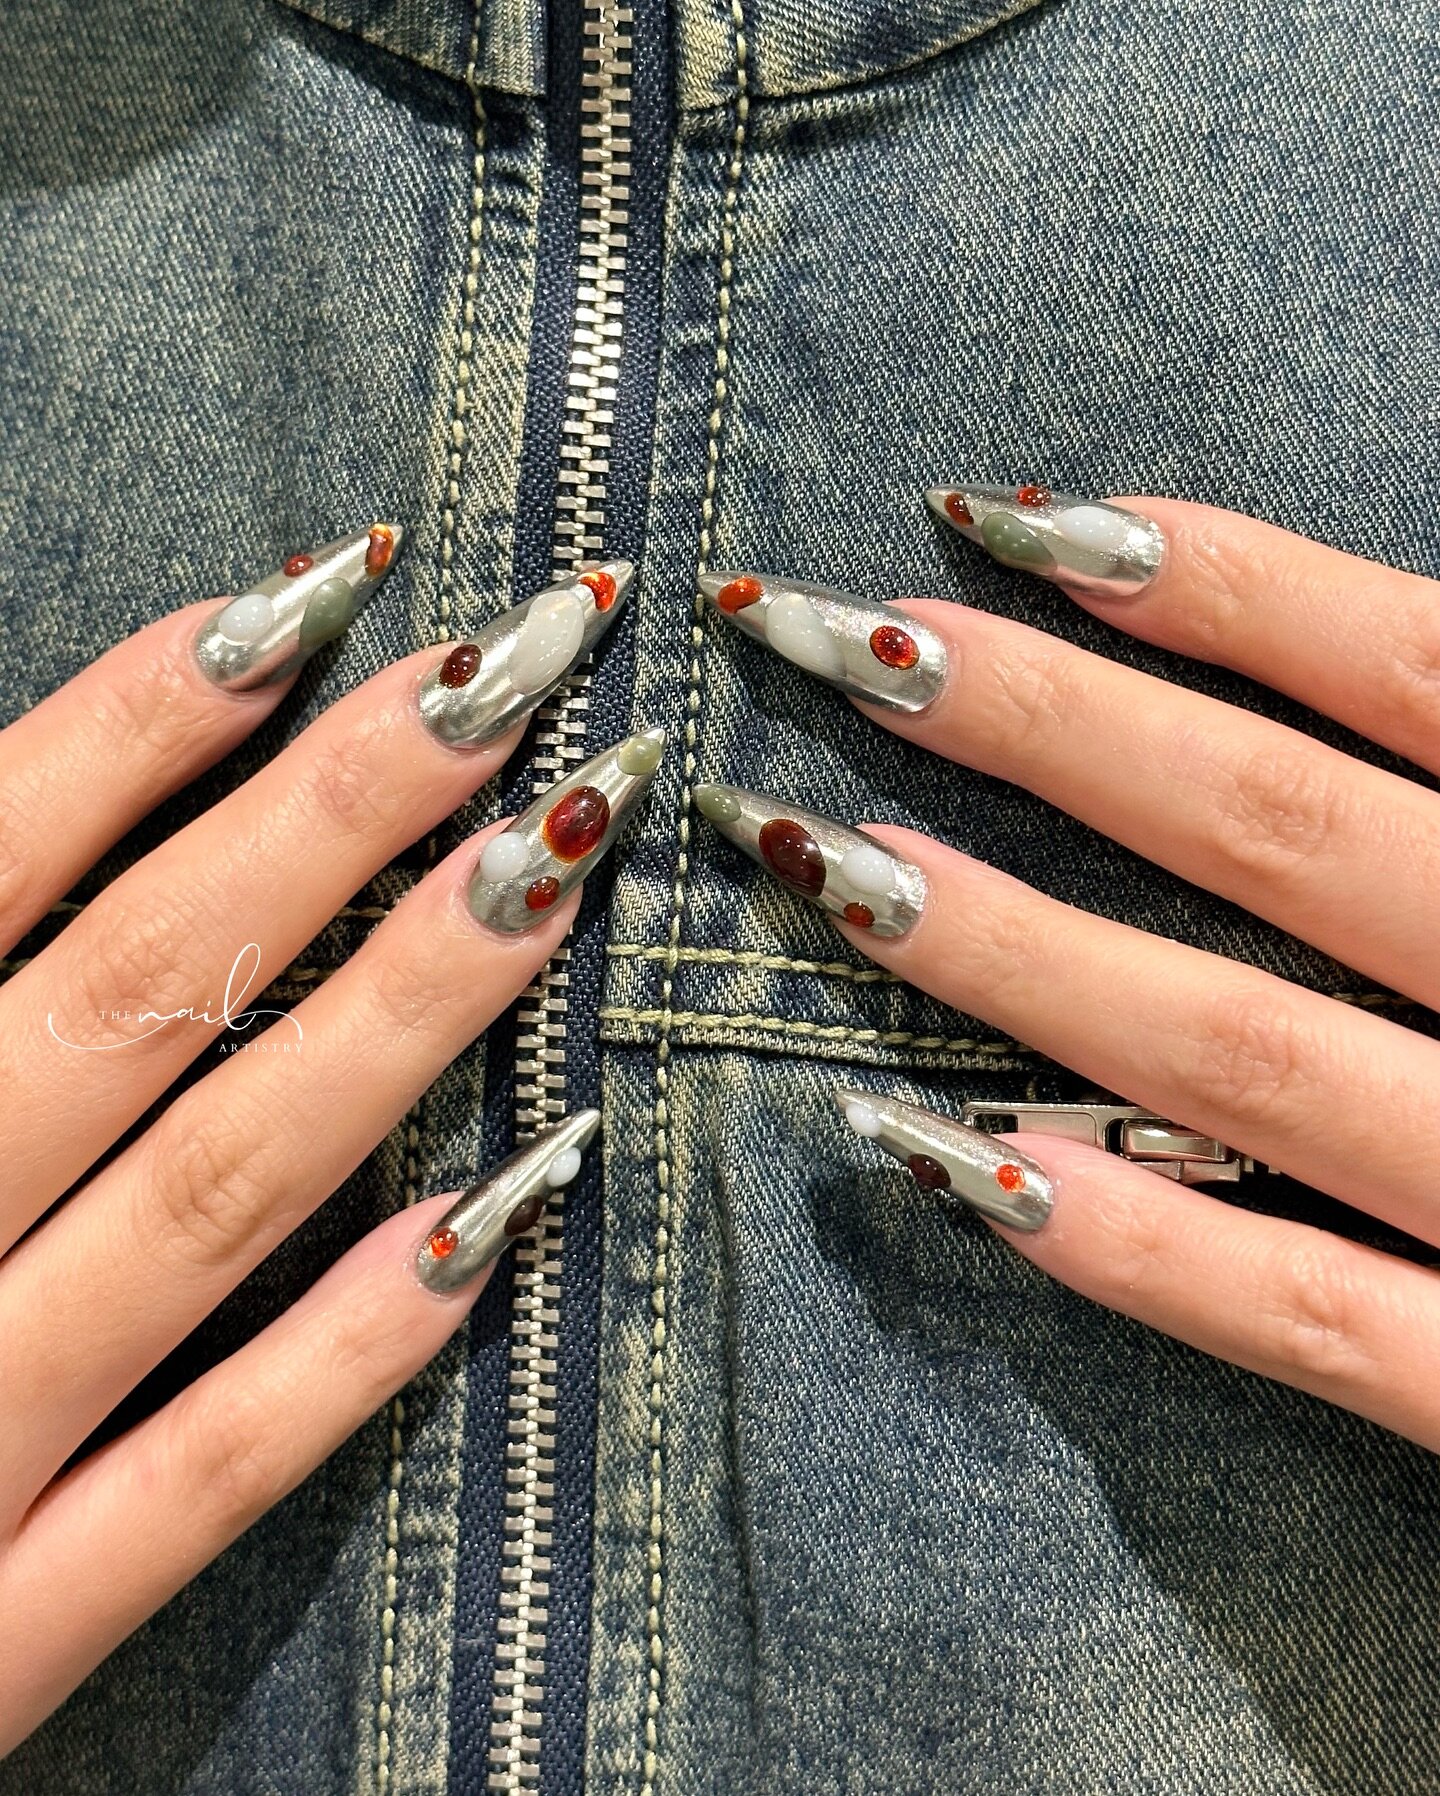 Silver Chrome with 3D Jelly Blobs 🖇️🎧🫠

🥰 When you nails are matching with your outfit ❤️&zwj;🔥😌 Who else feeling great after have your nails done? 💅🏻
📲 Book with us via link in bio / Walk-in welcomes 
☎️ 020 7018 6636 
.
.
.
.
.
.
#nails #n